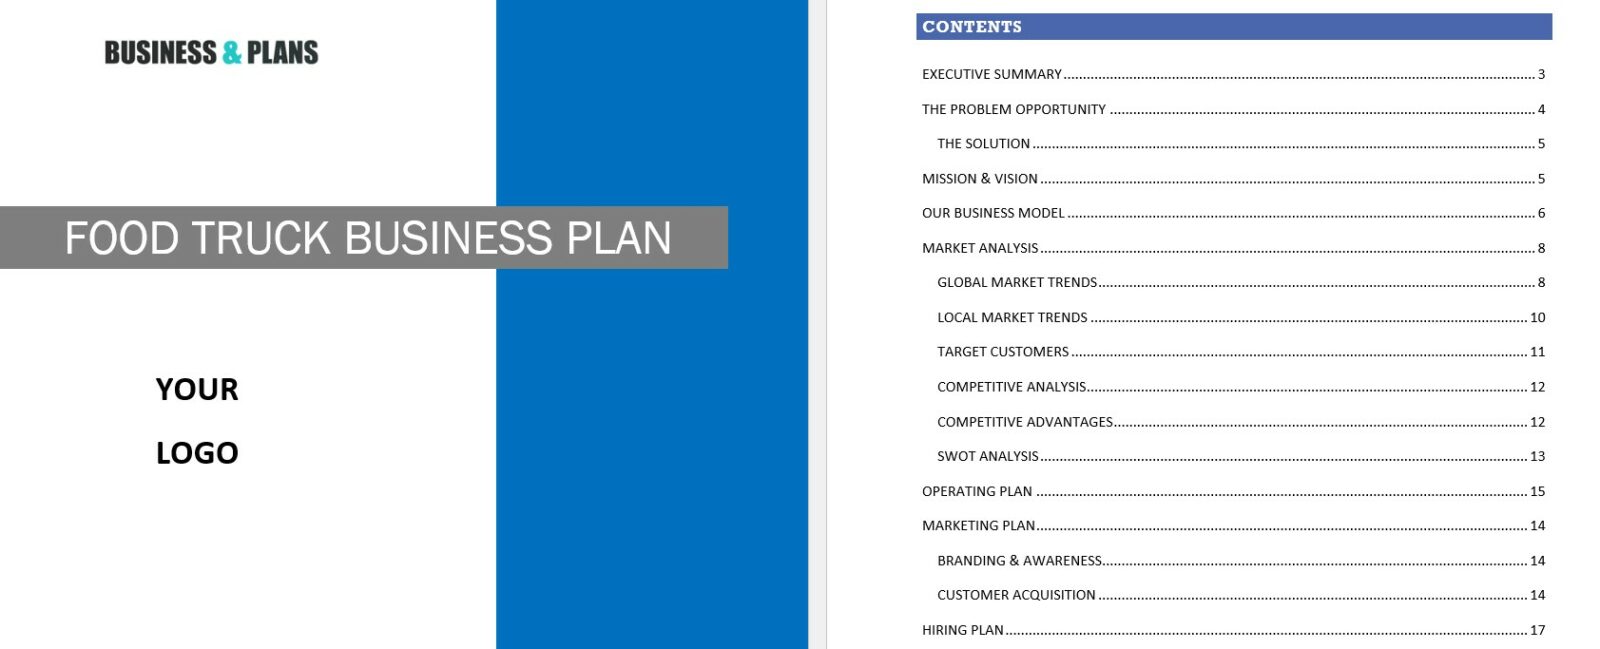 Food truck business plan template in Word